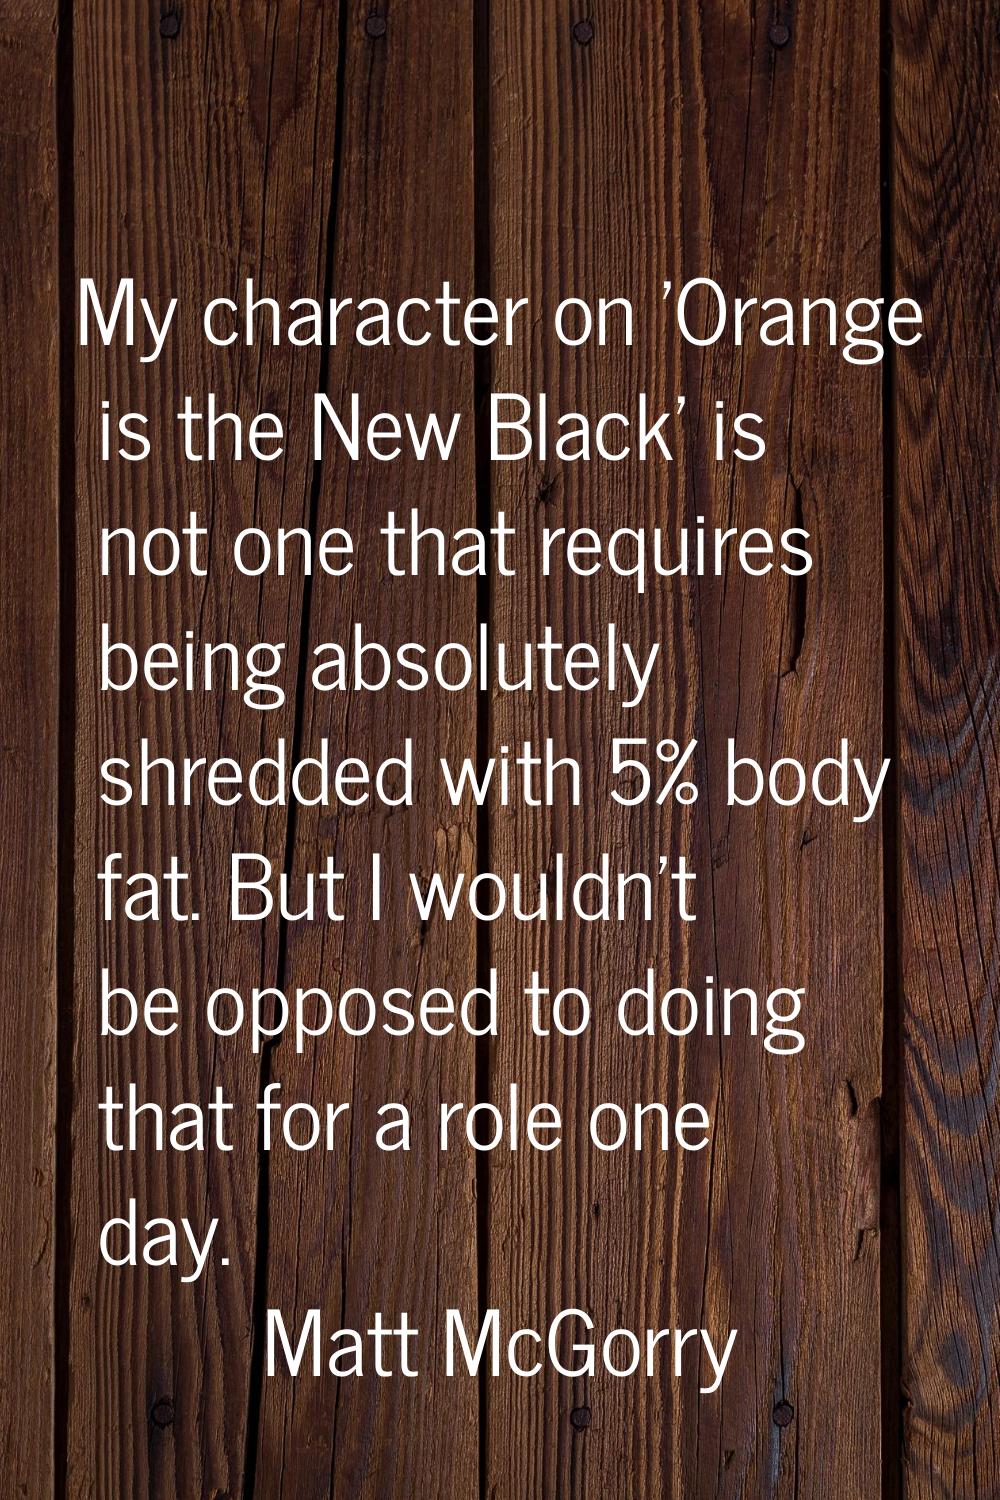 My character on 'Orange is the New Black' is not one that requires being absolutely shredded with 5